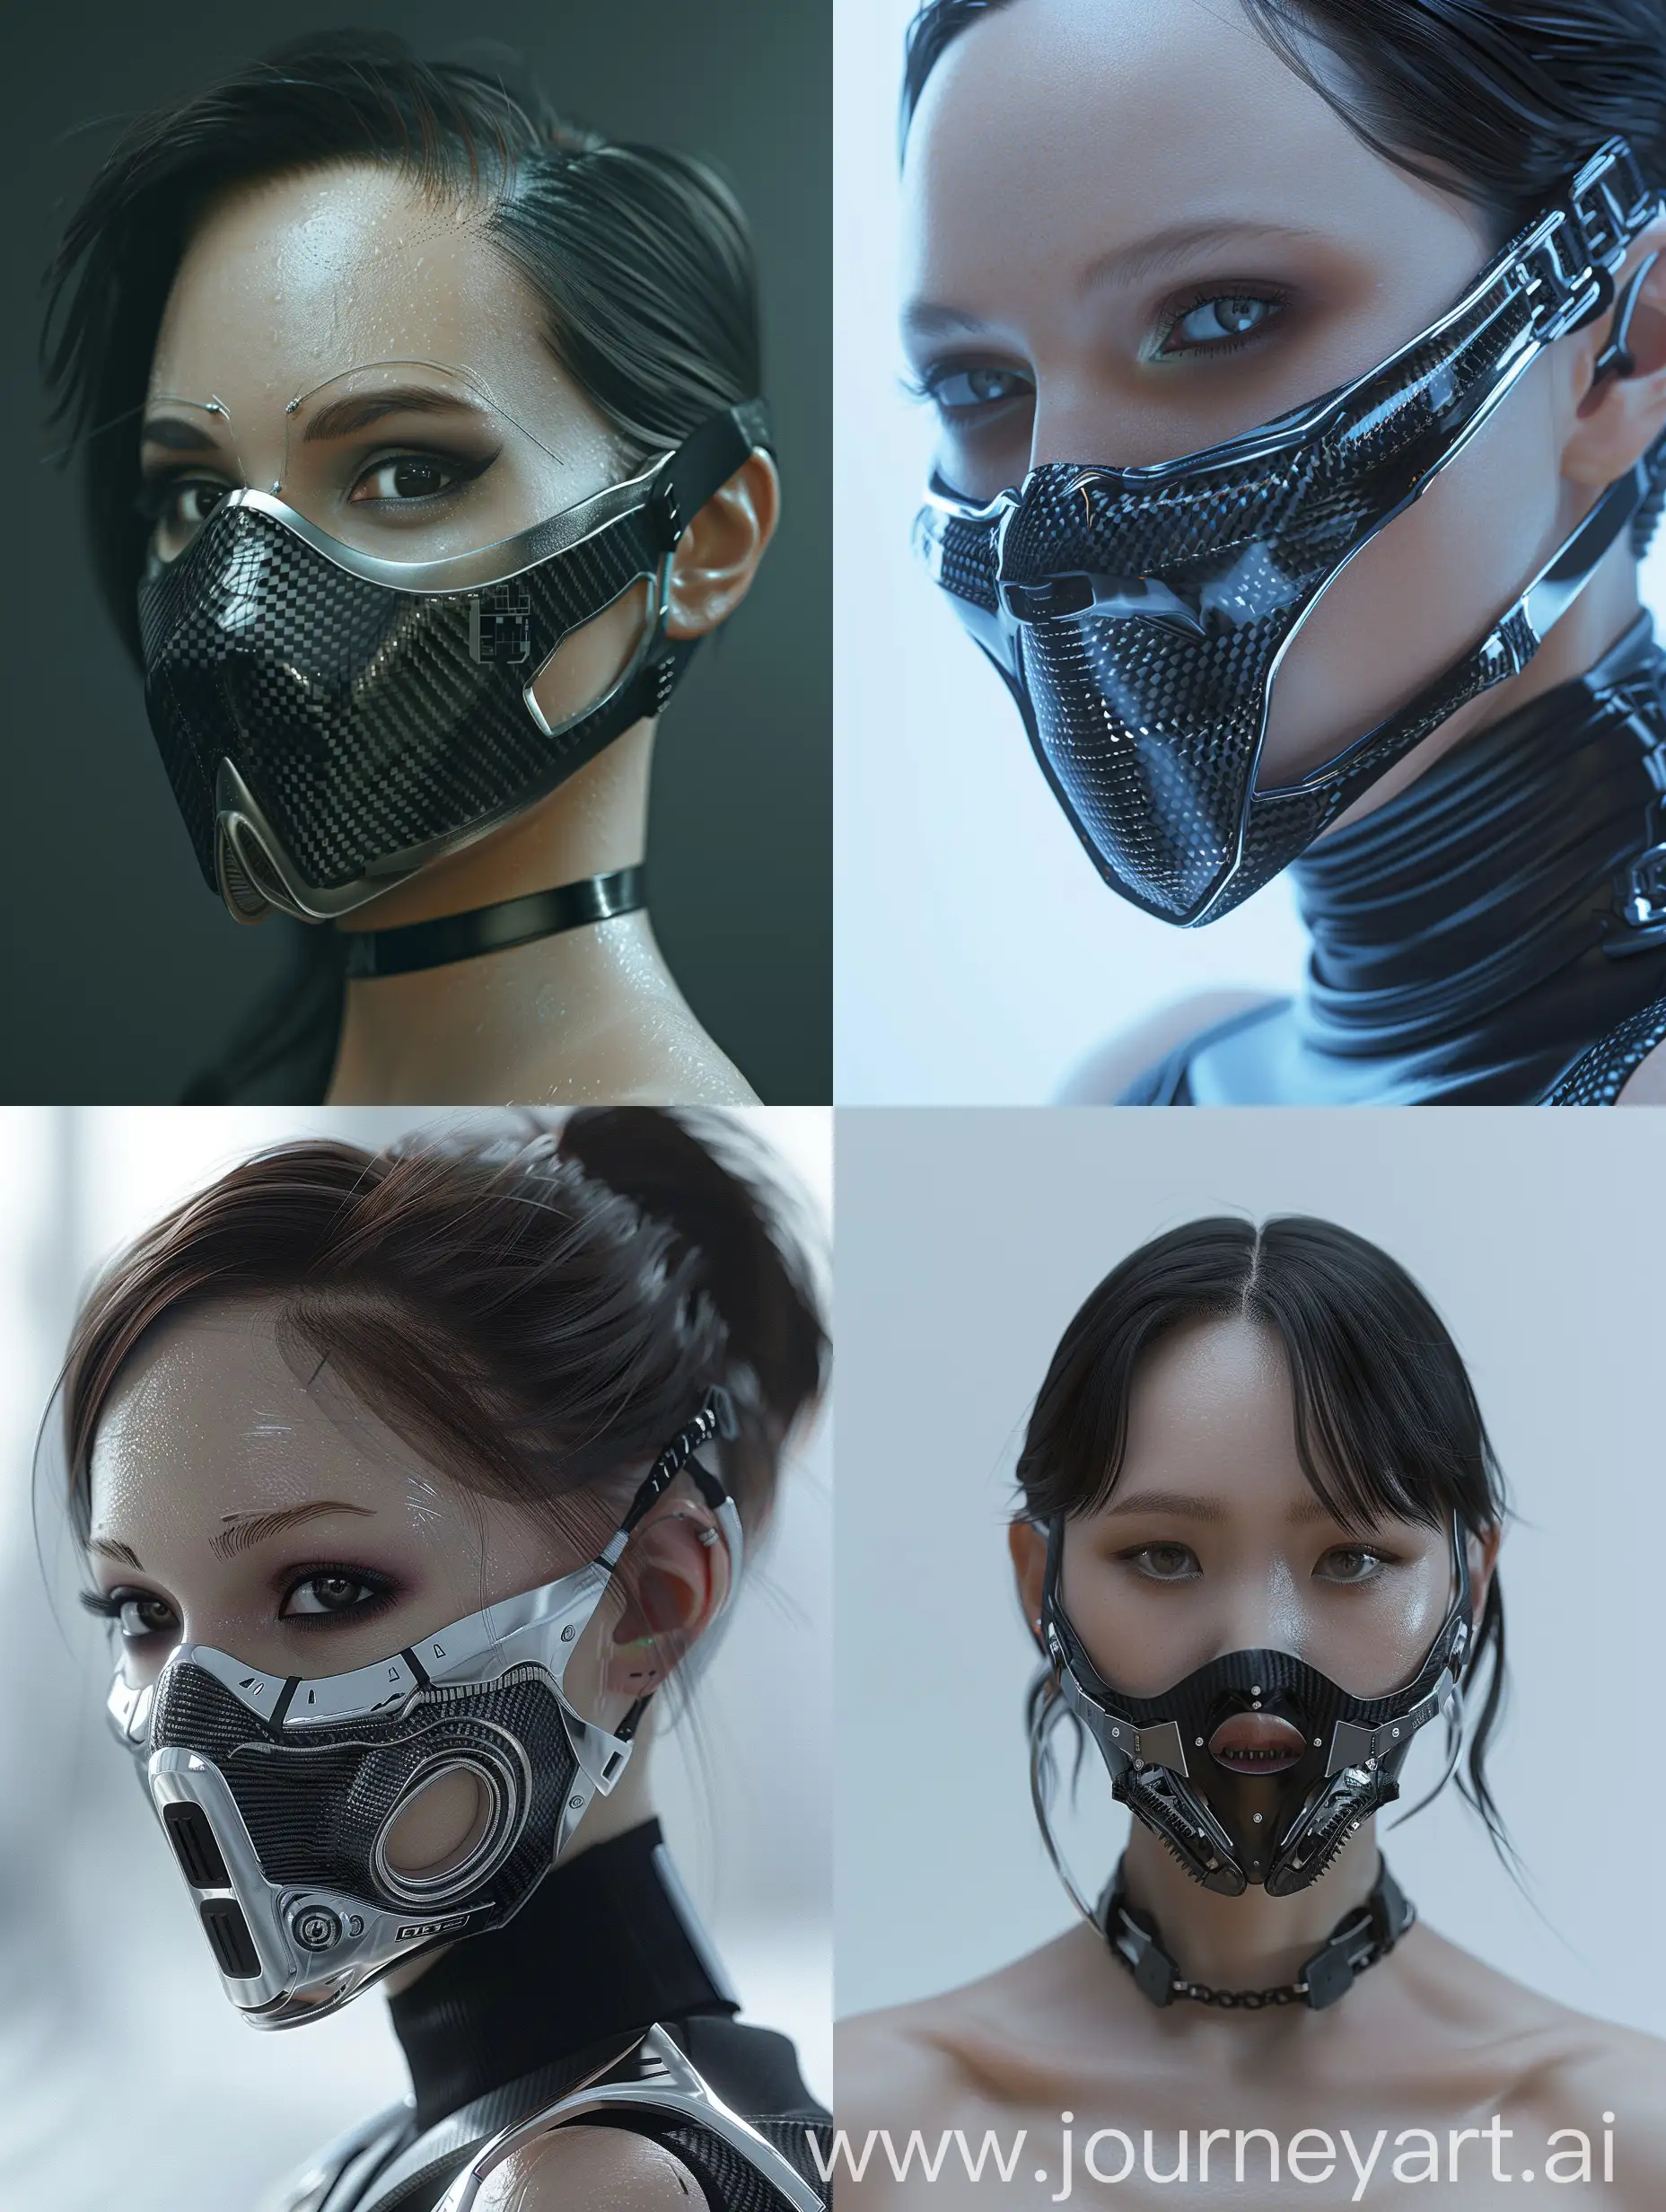 Introducing an alluring character with a cyberpunk mouth-covering mask that seamlessly blends extreme technology with exquisite details such as carbon fiber textures and aluminum accents. This mask, designed to cover only the mouth, showcases the perfect fusion of advanced cybernetic enhancements with futuristic elegance. Paired with a beautiful model exuding cyberpunk charm, the harmonious balance between high-tech elements and captivating design creates a visually striking portrayal of the cybernetic future.